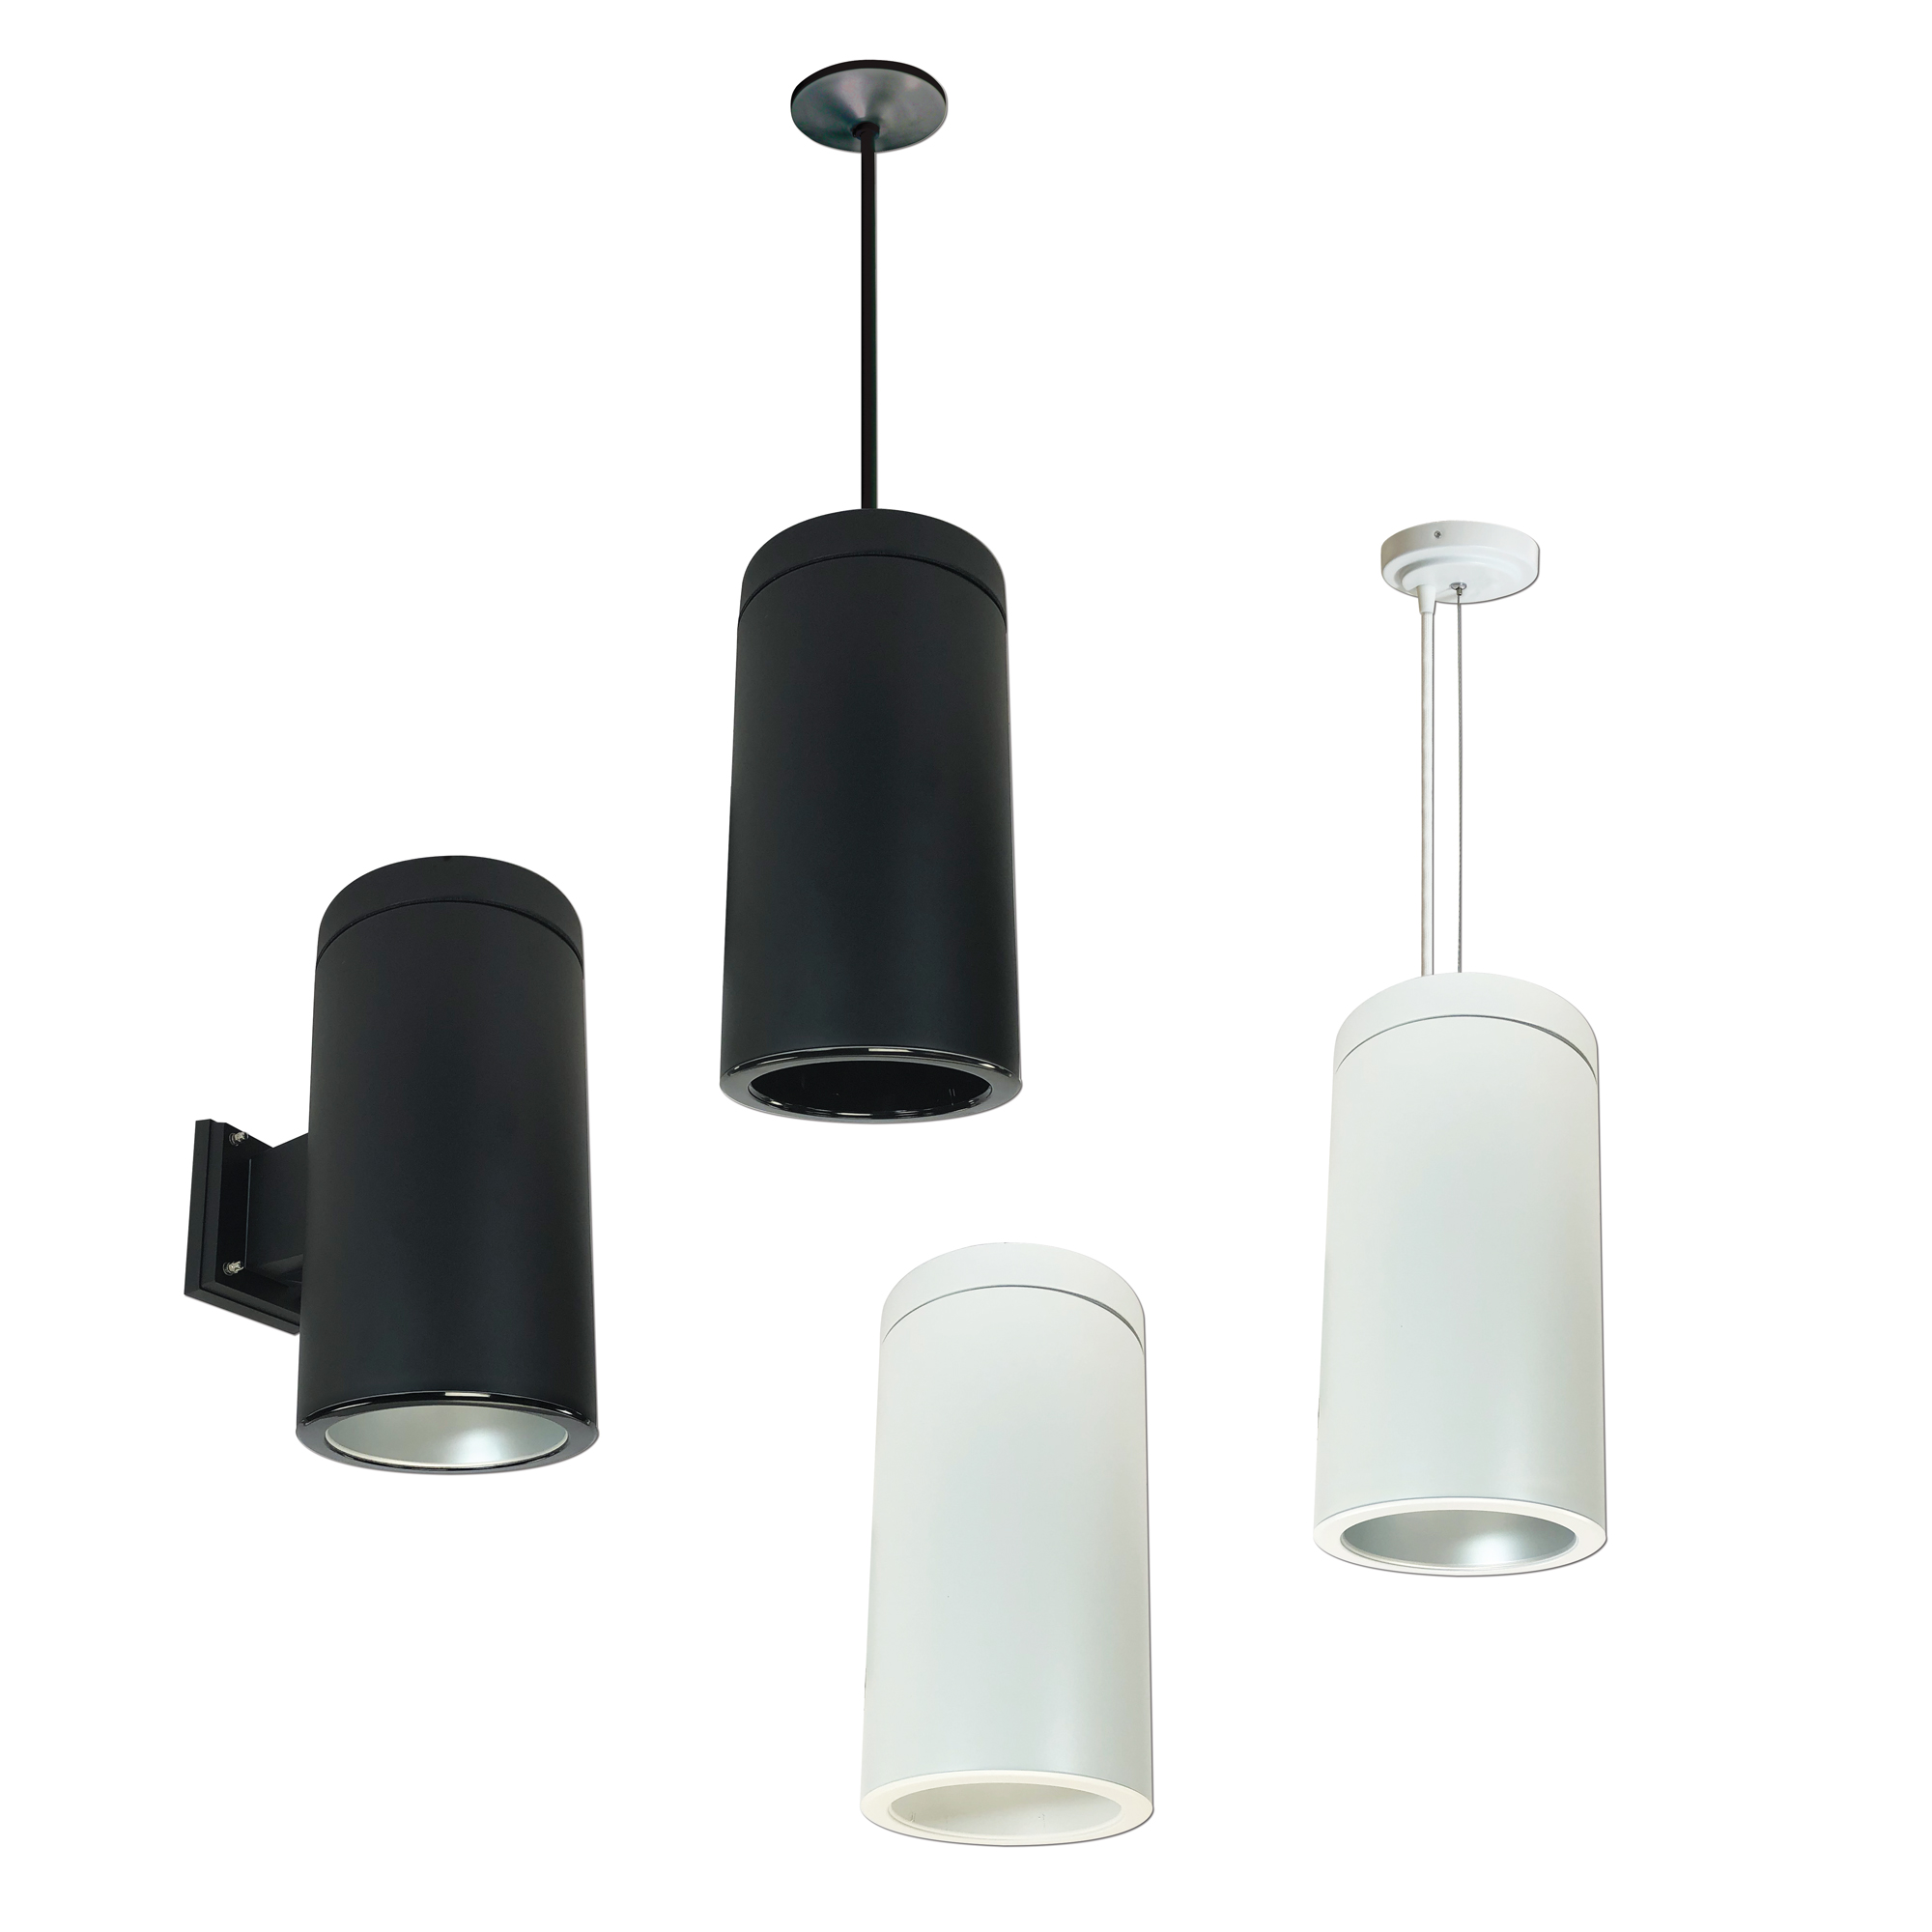 Nora Lighting Cylinder Pendents Now Feature Four Mounting Options